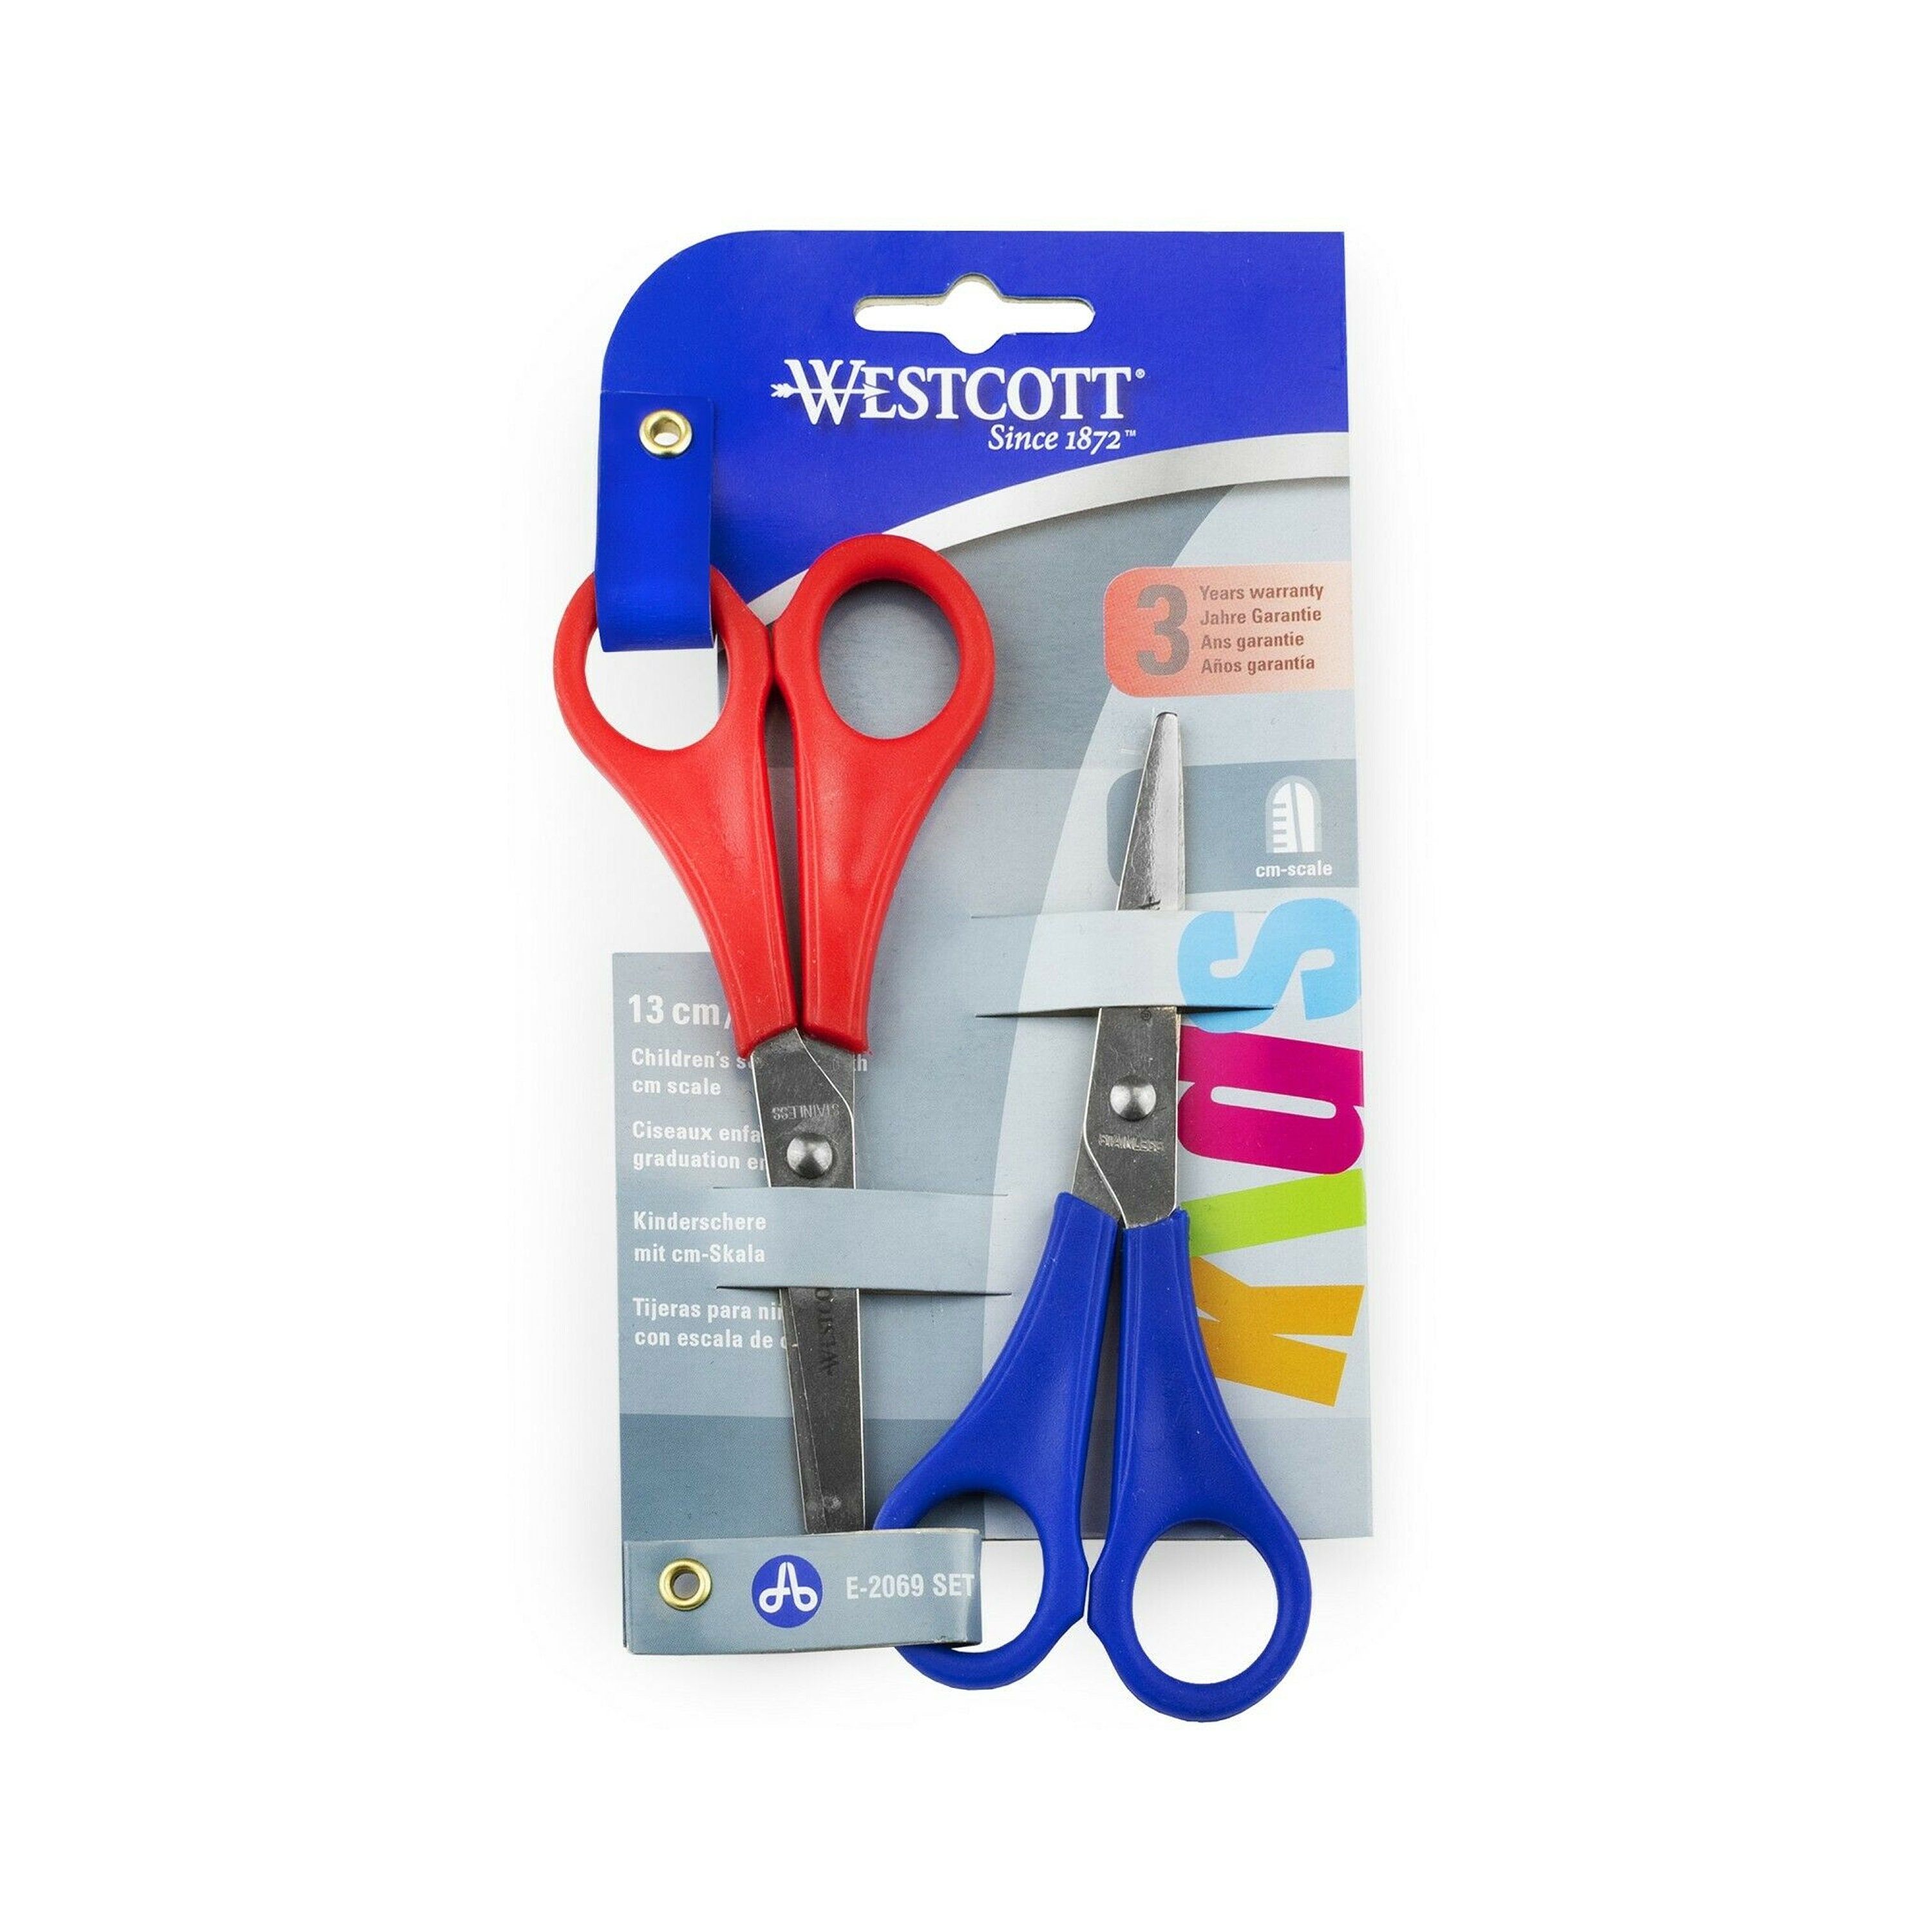 Westcott Soft Handle 5 Scissors, Pointed, Colors Vary, Pack of 12